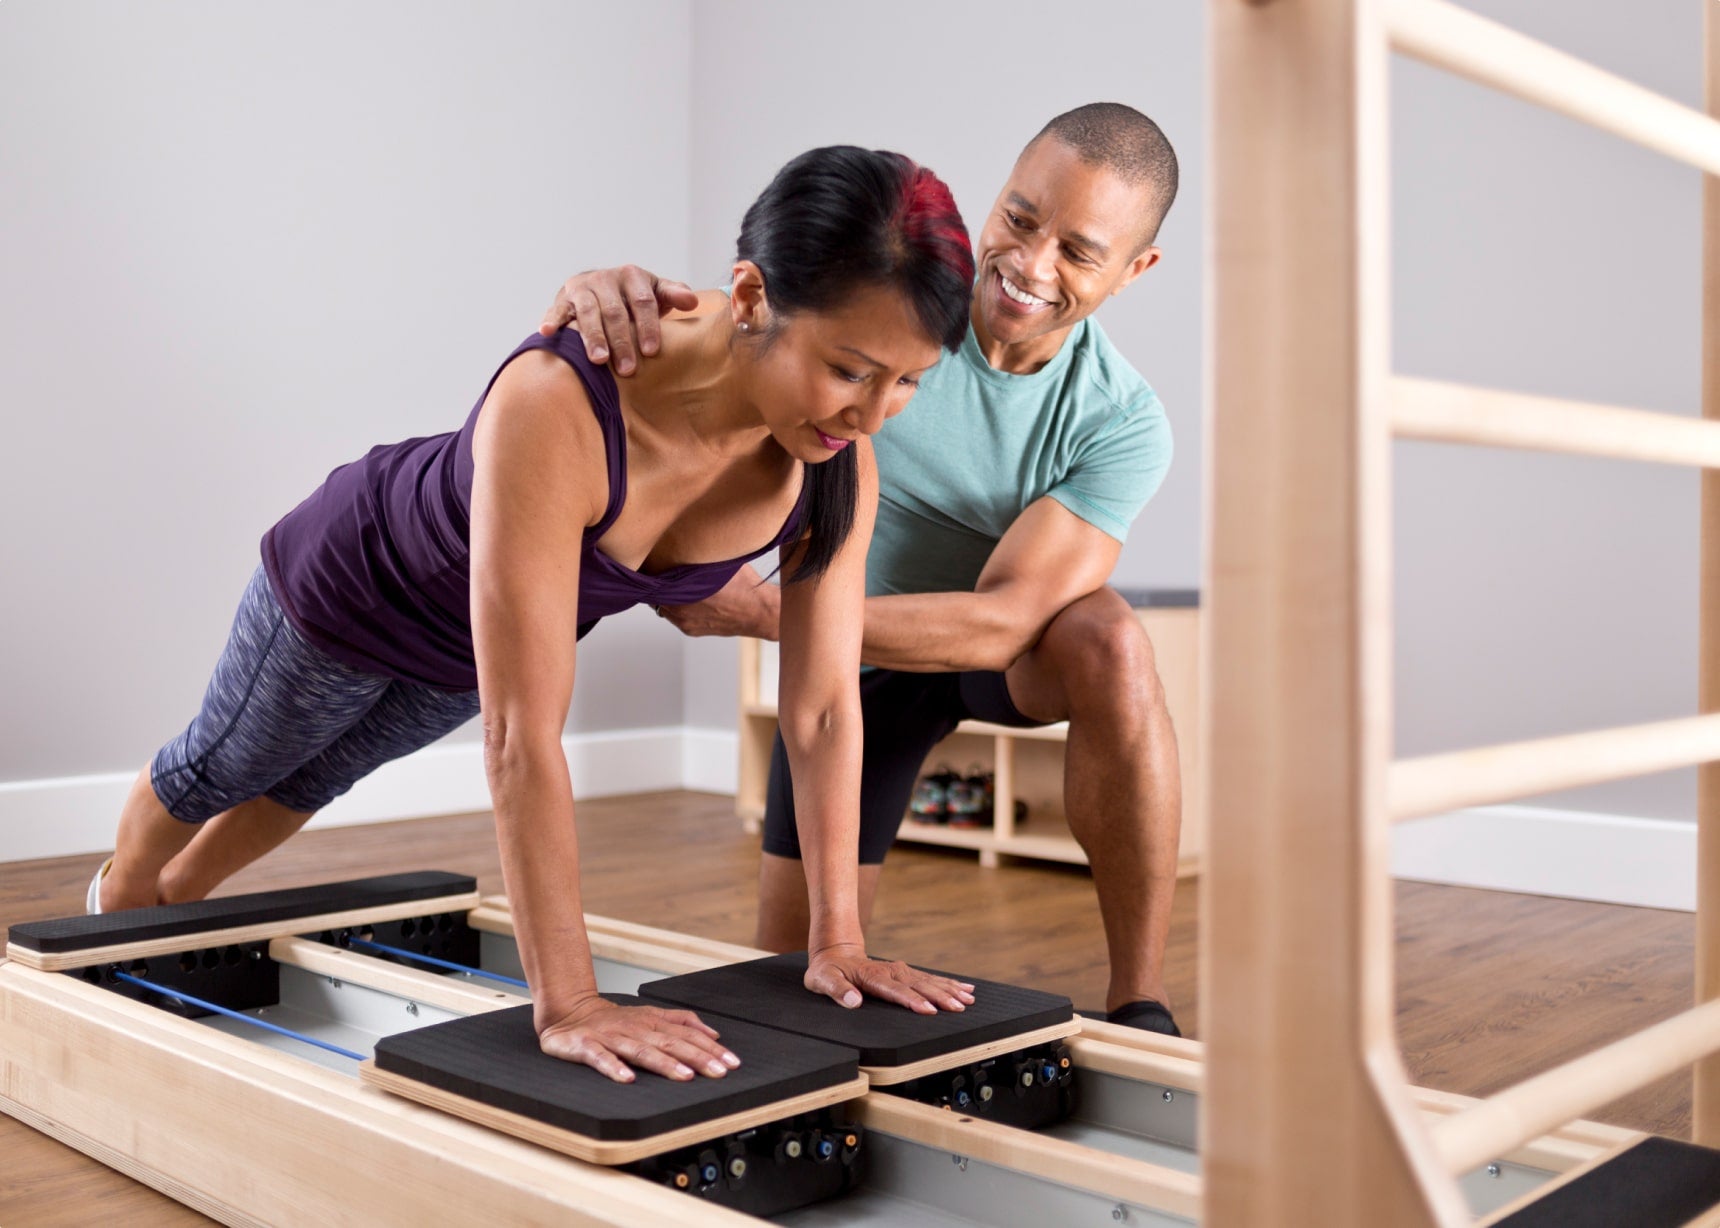 Physical Therapy Equipment for Home - CoreAlign Rehab Equipment